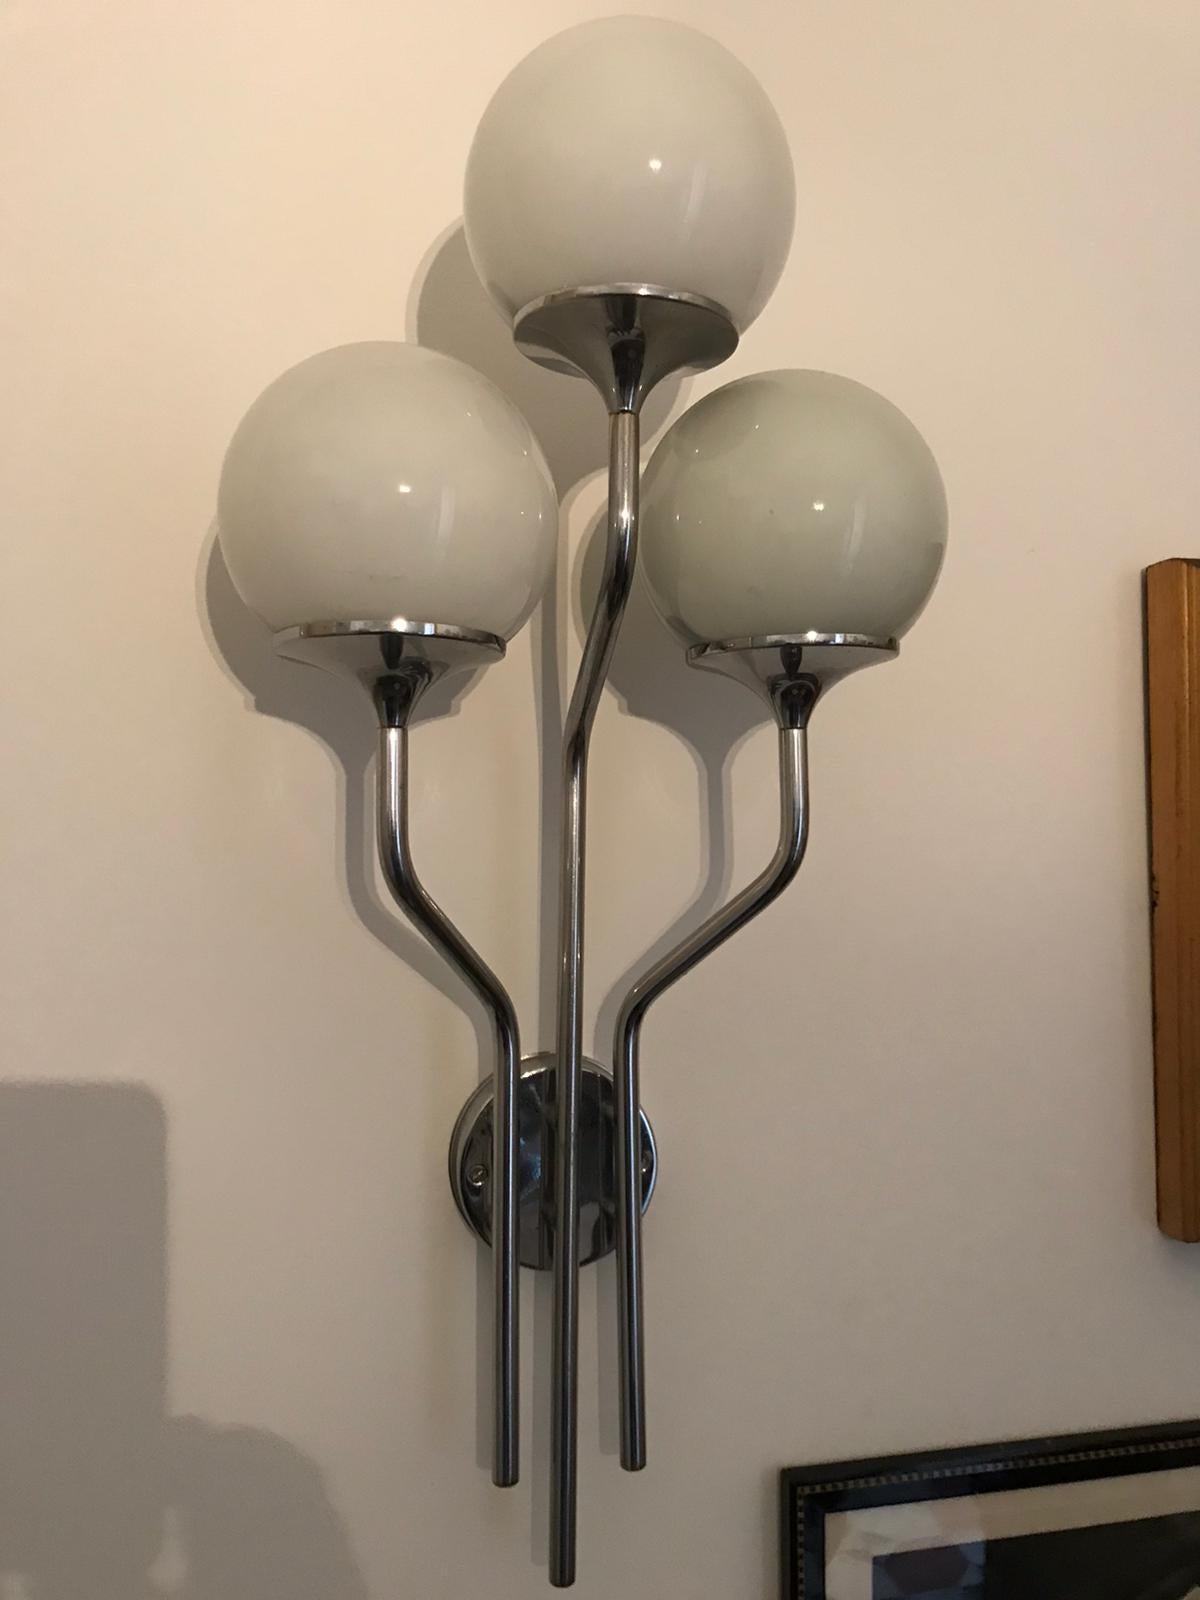 Pair of Italian wall lights in chrome with opaline glass shades by Goffredo Reggiani produced by Studio Reggiani. Made in Italy from the 1960s.